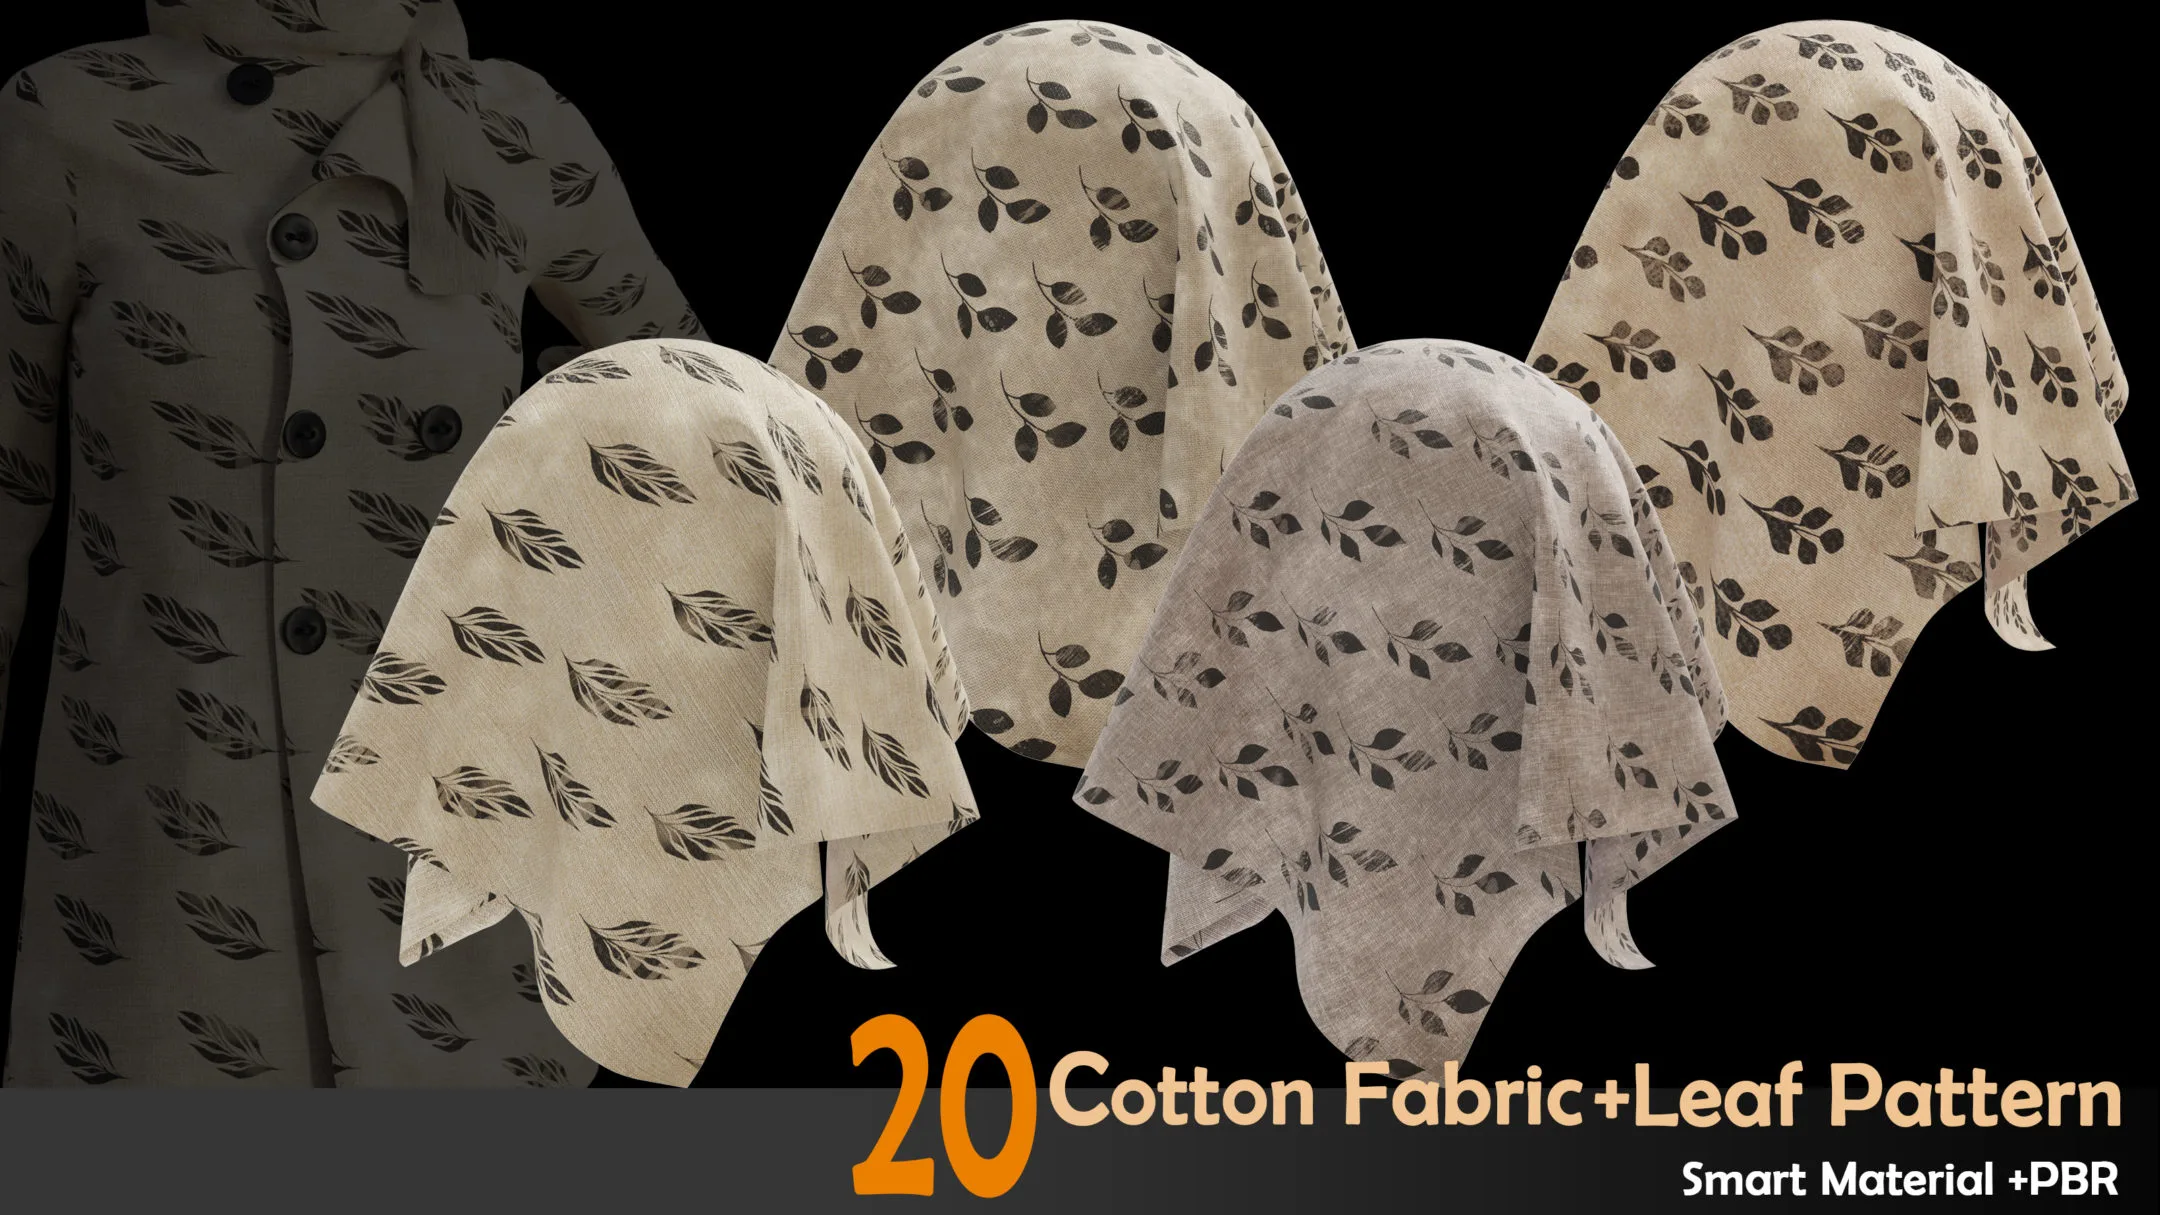 20 Patterned fabric Smart material+PBR